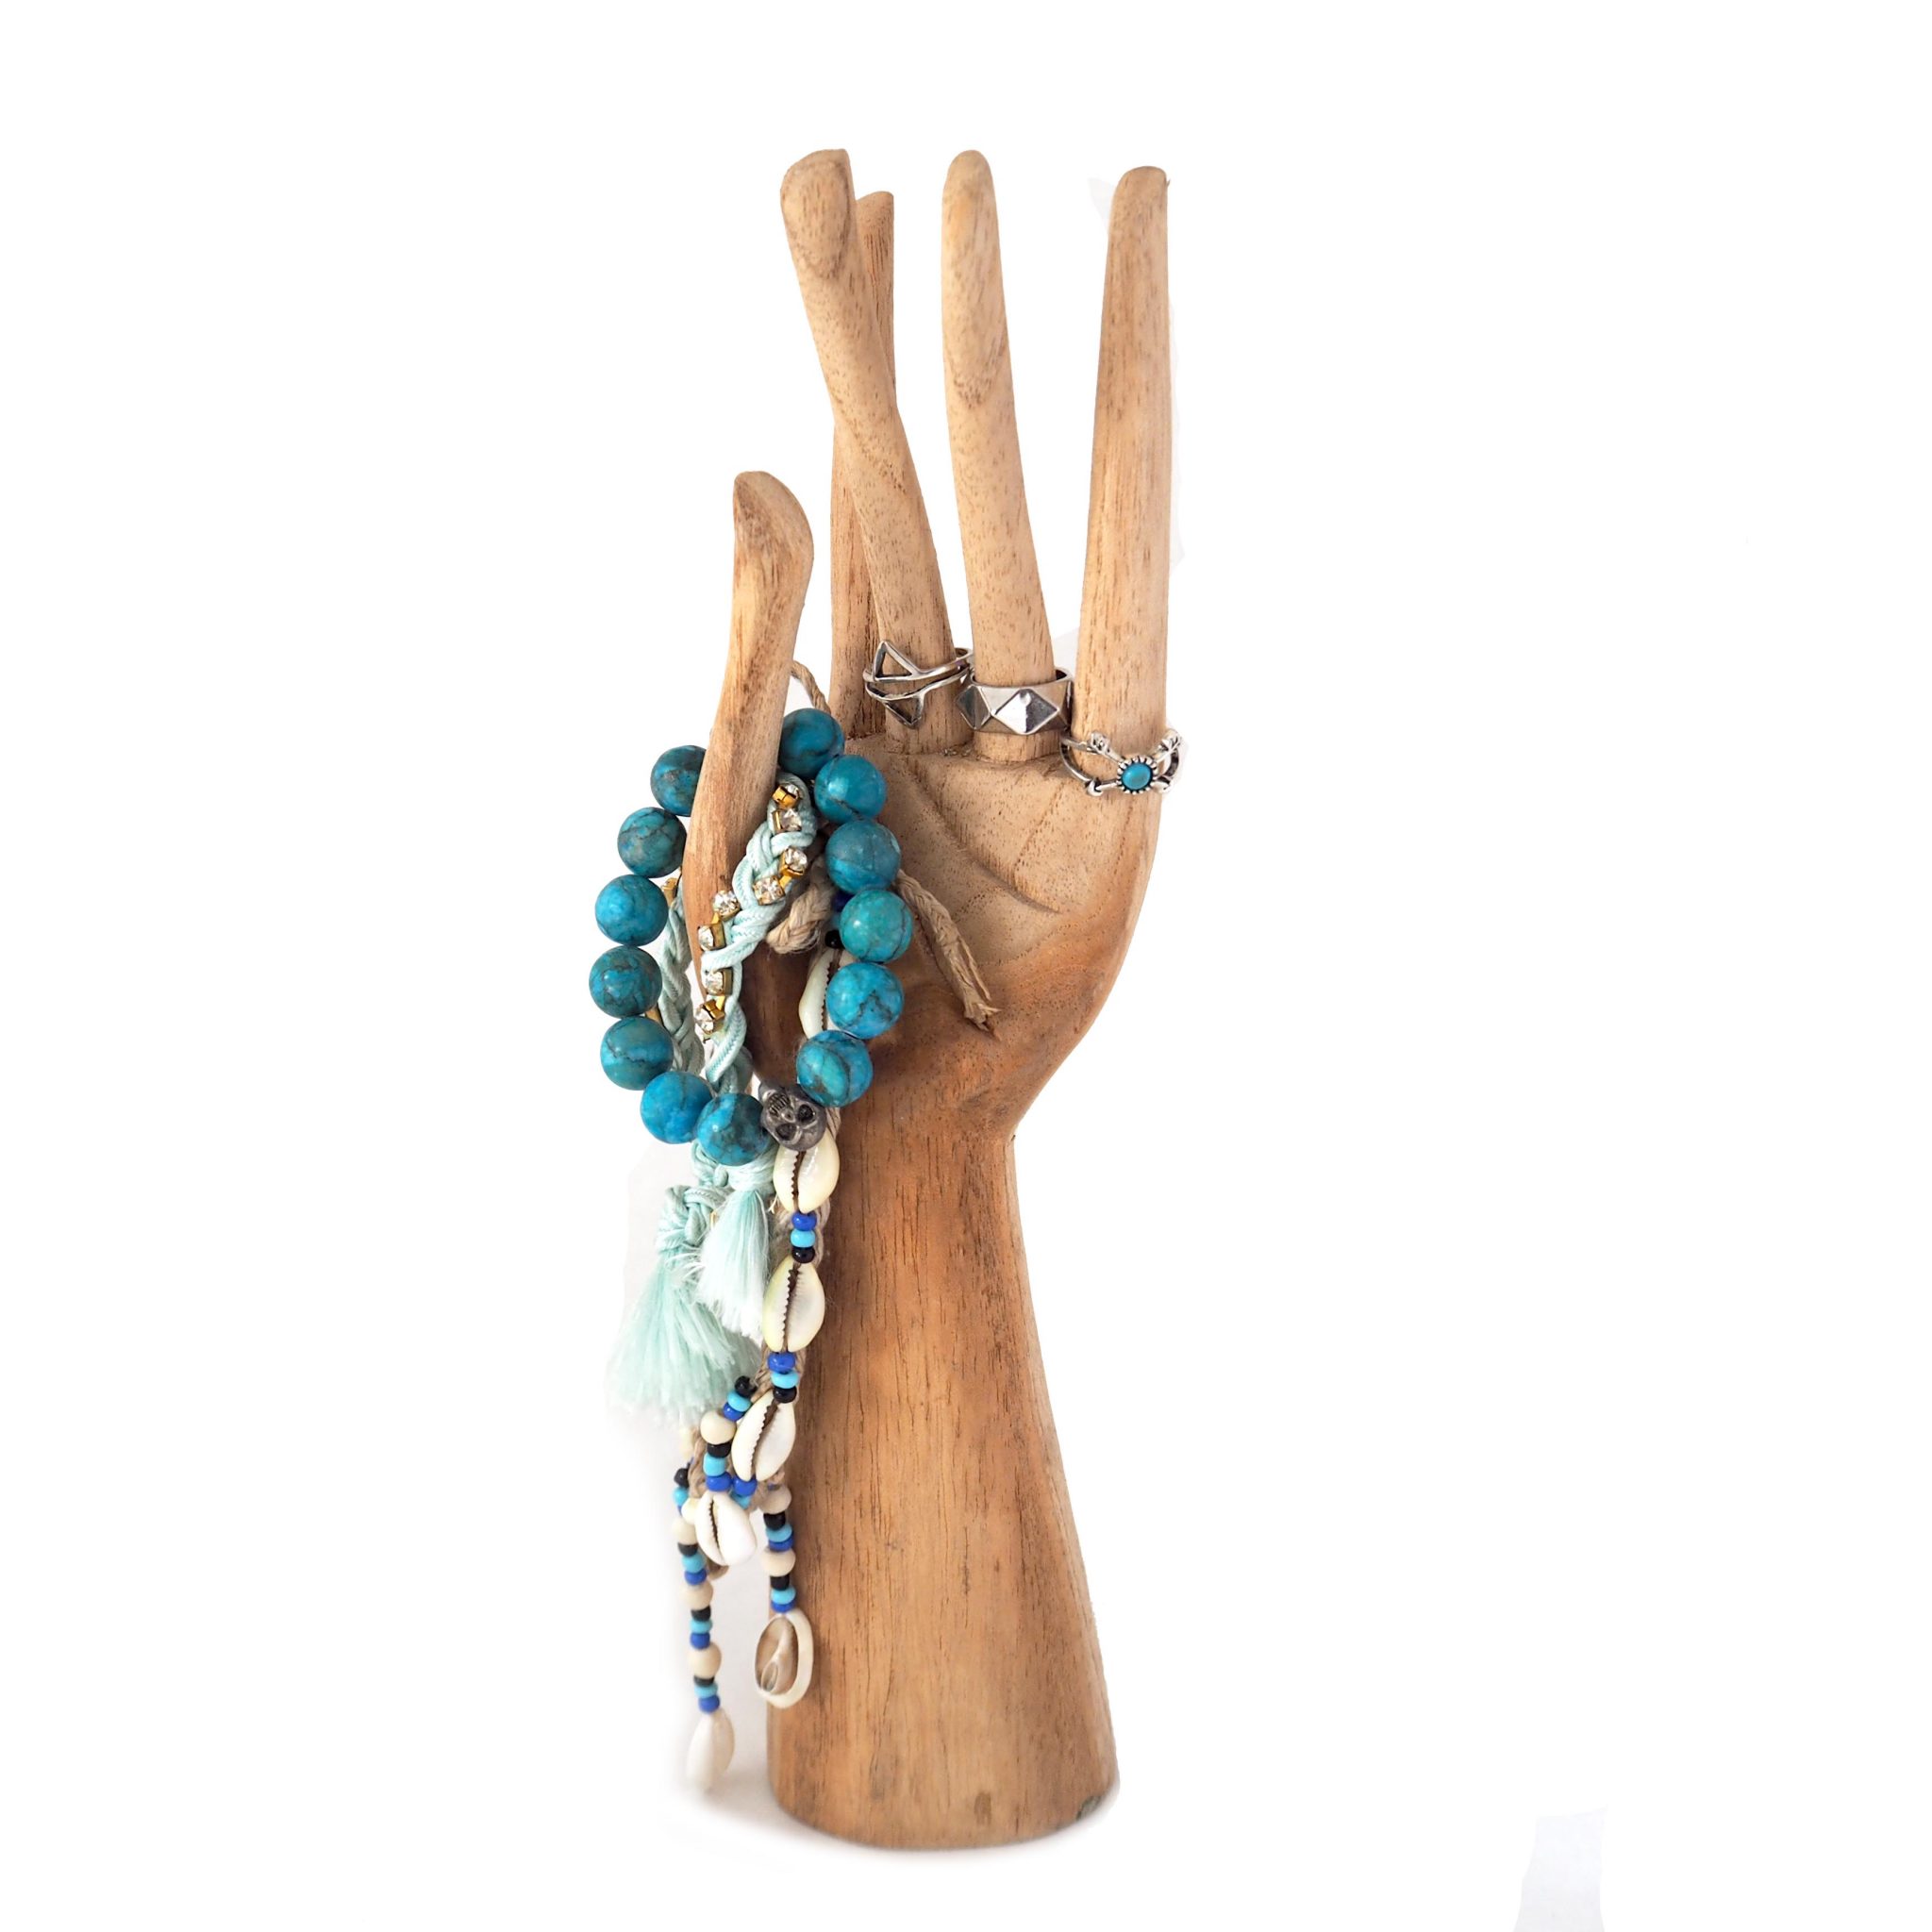 Pair Of Hands Wood Jewelry Display Bracelet And Ring  Holder 7” By Zenda Imports 